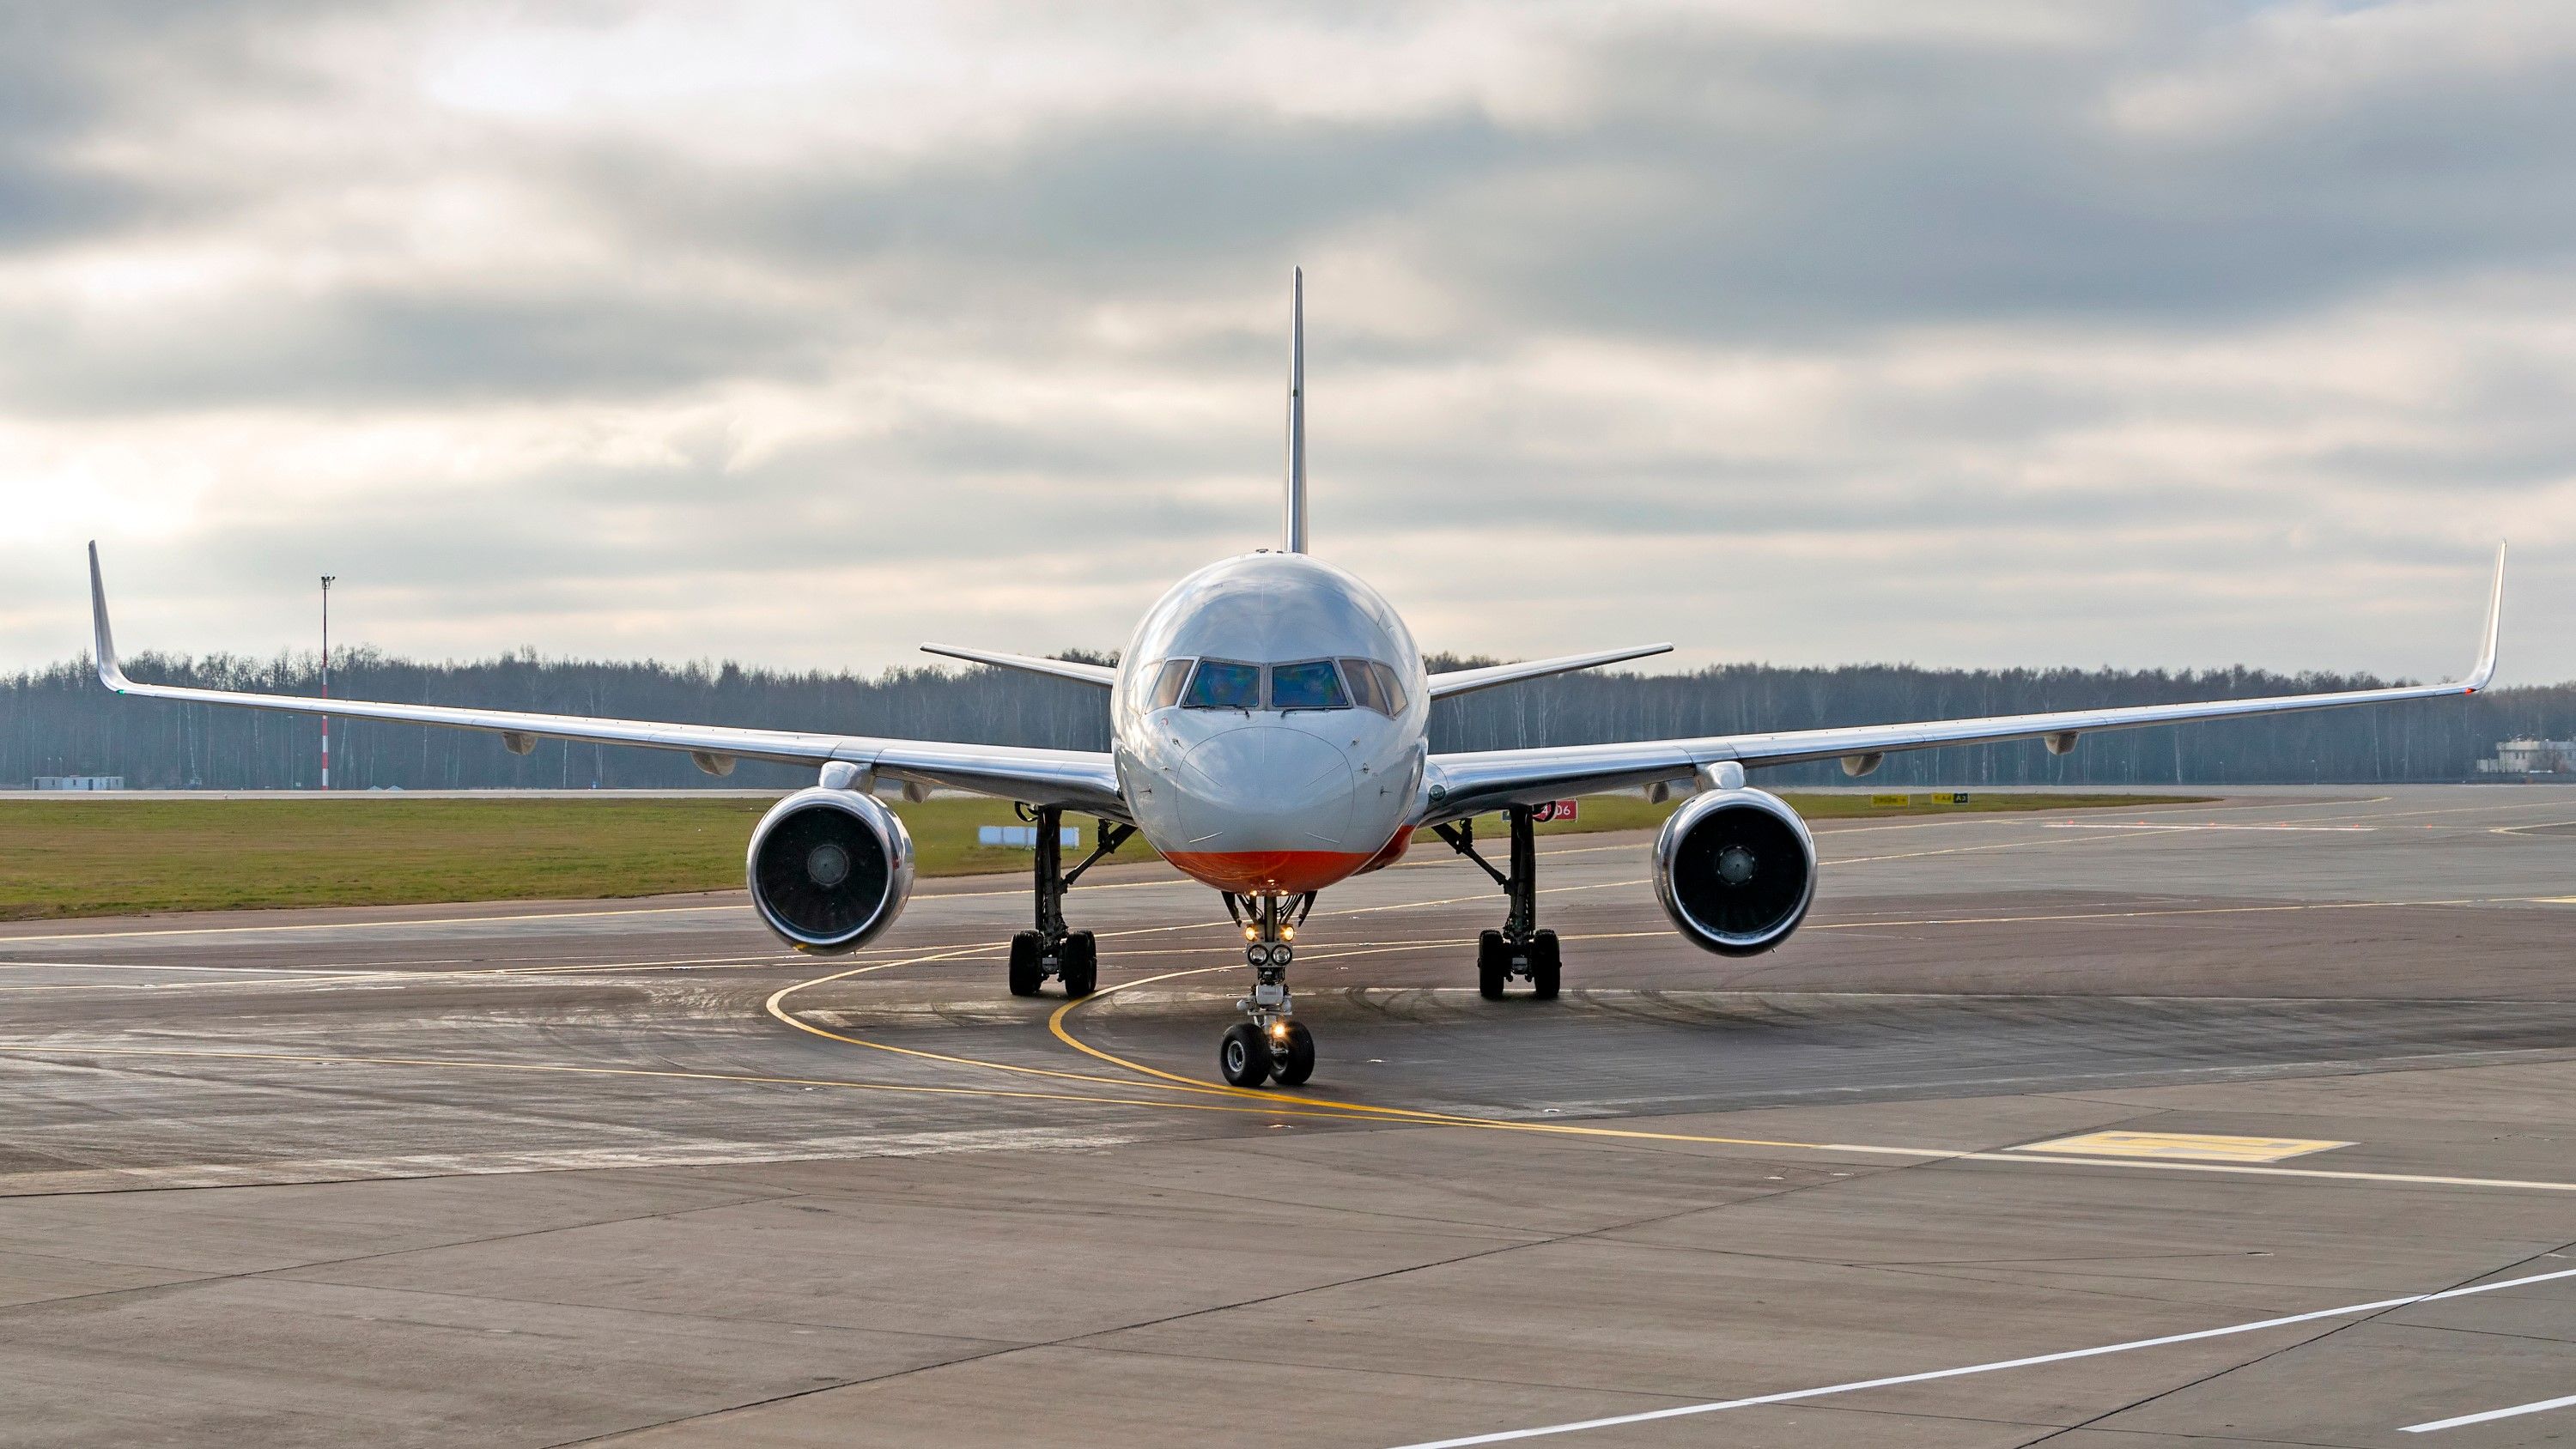 A head on view of a Boeing 757 on an airport apron.